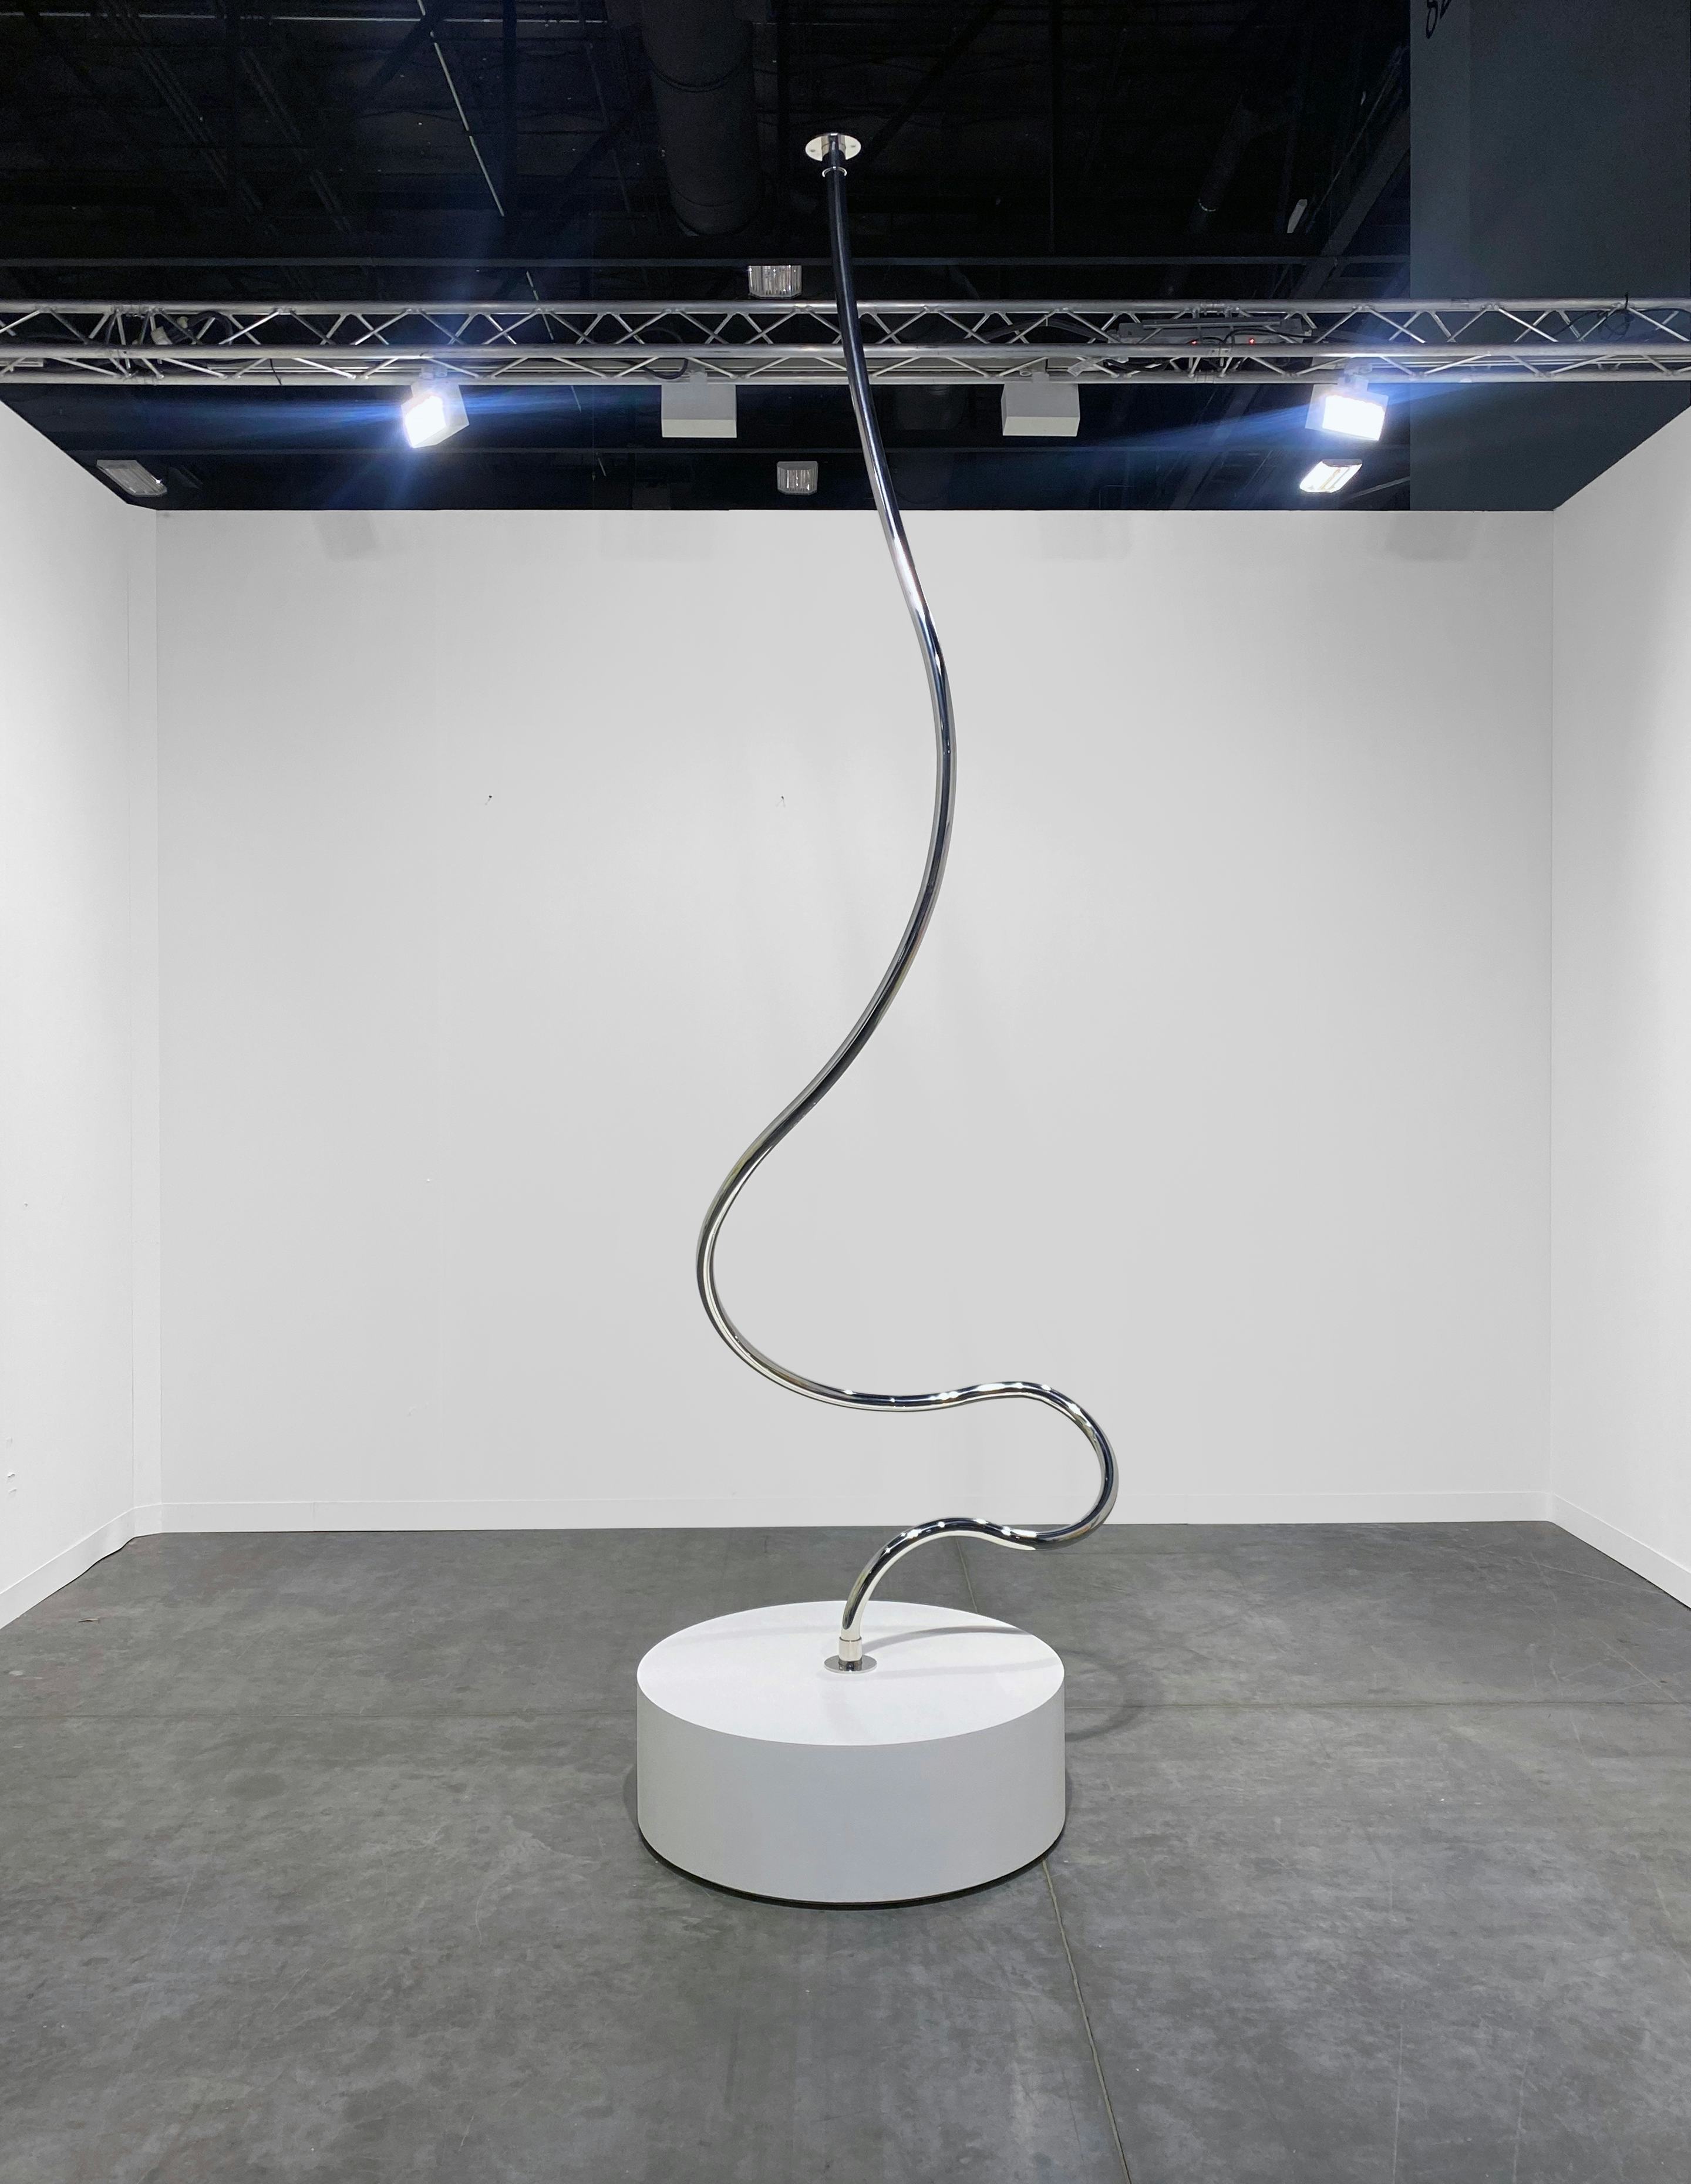 Relaxed Pole (2022)

Mirror polished stainless steel

127h x 36w x 40d inches (322.58h x 91.44w x 101.6d cm)